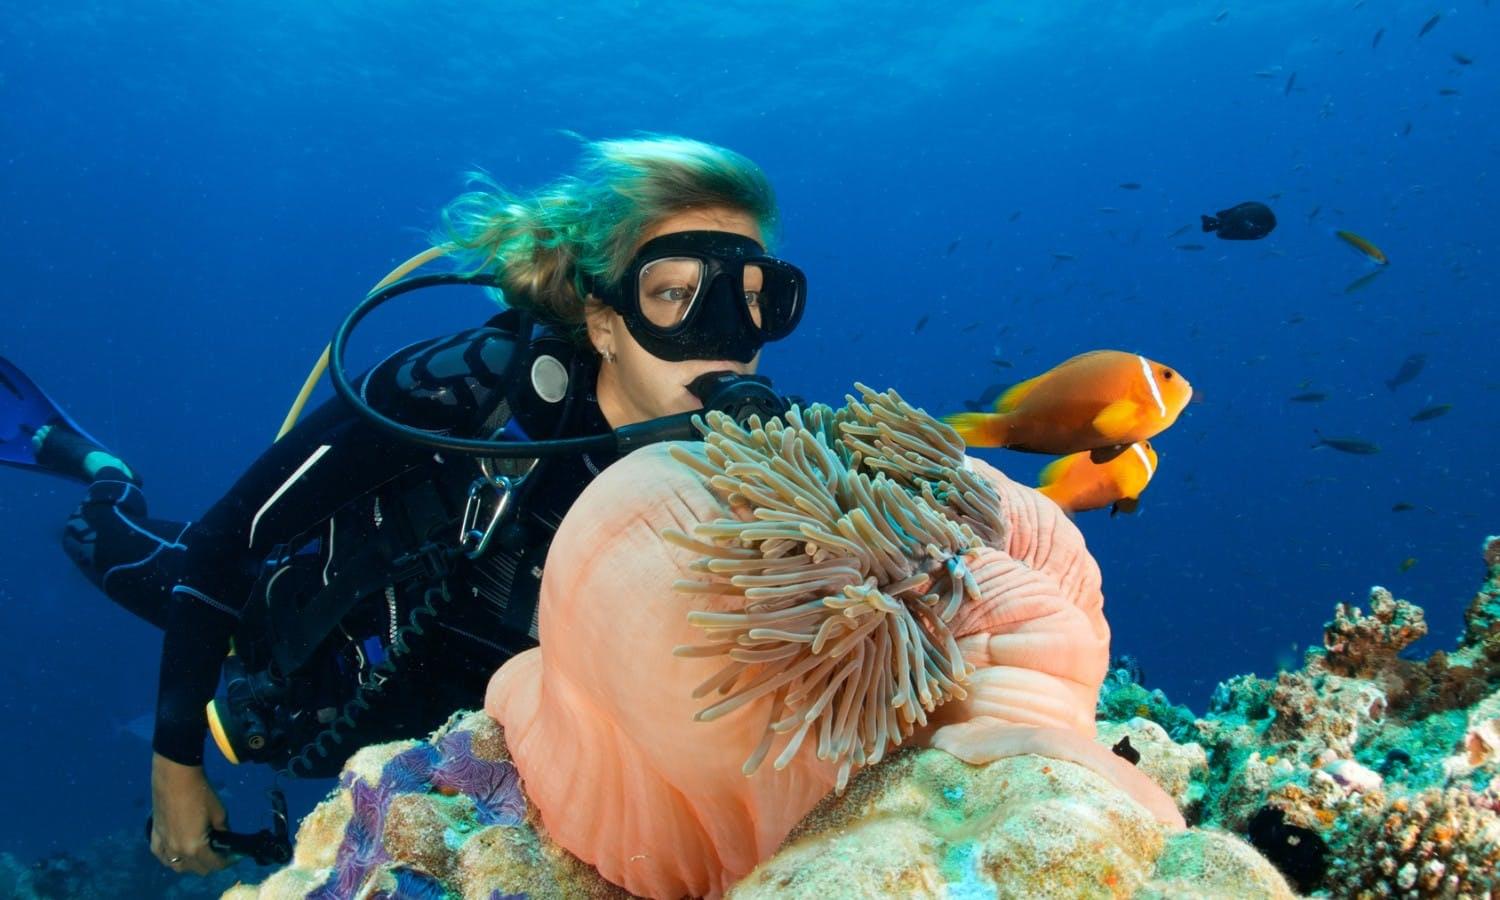 Get well equipped scuba diving experience in Dubai and witness unique aquatic life